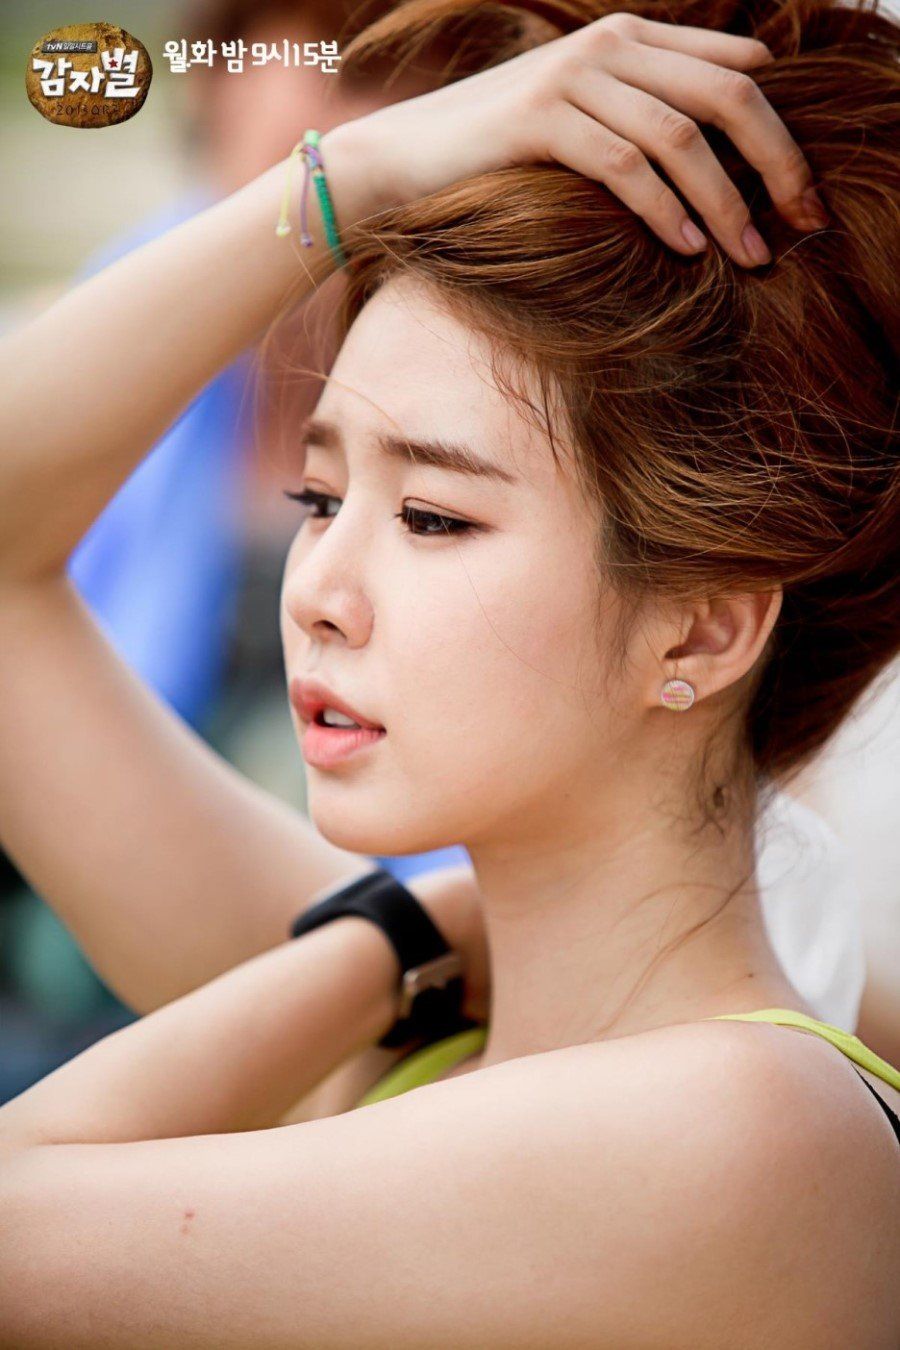 50 Yoo In-na Nude Pictures Are Sure To Keep You Motivated 67